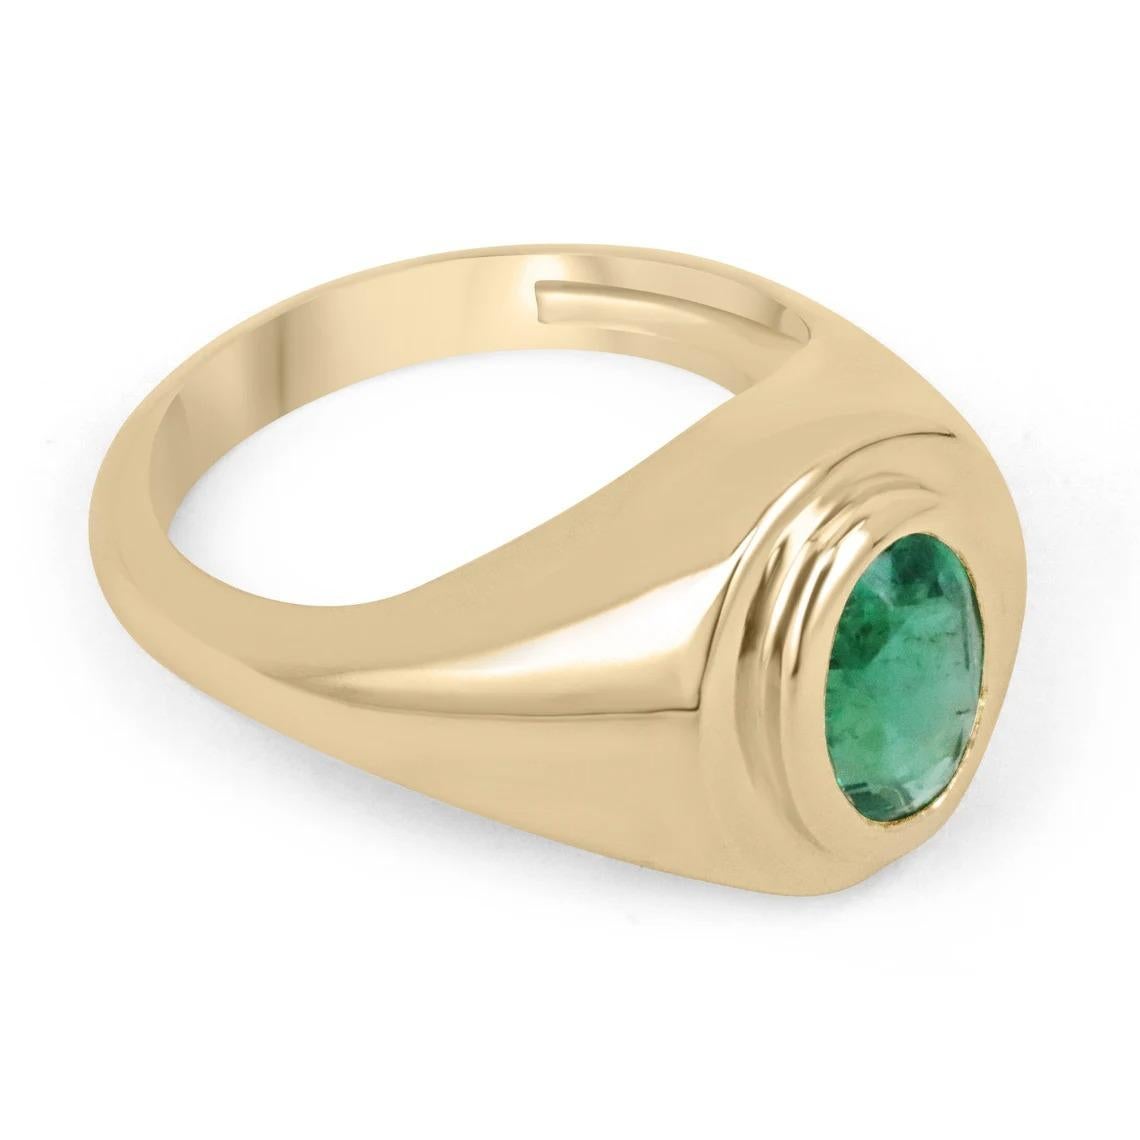 A luxurious solitaire emerald ring. The center stone features a magnificent 1.55-carat, natural oval cut emerald ethically sourced from the mines of Zambia. This gemstone showcases a desirable rich, vivid, dark green color with a divine